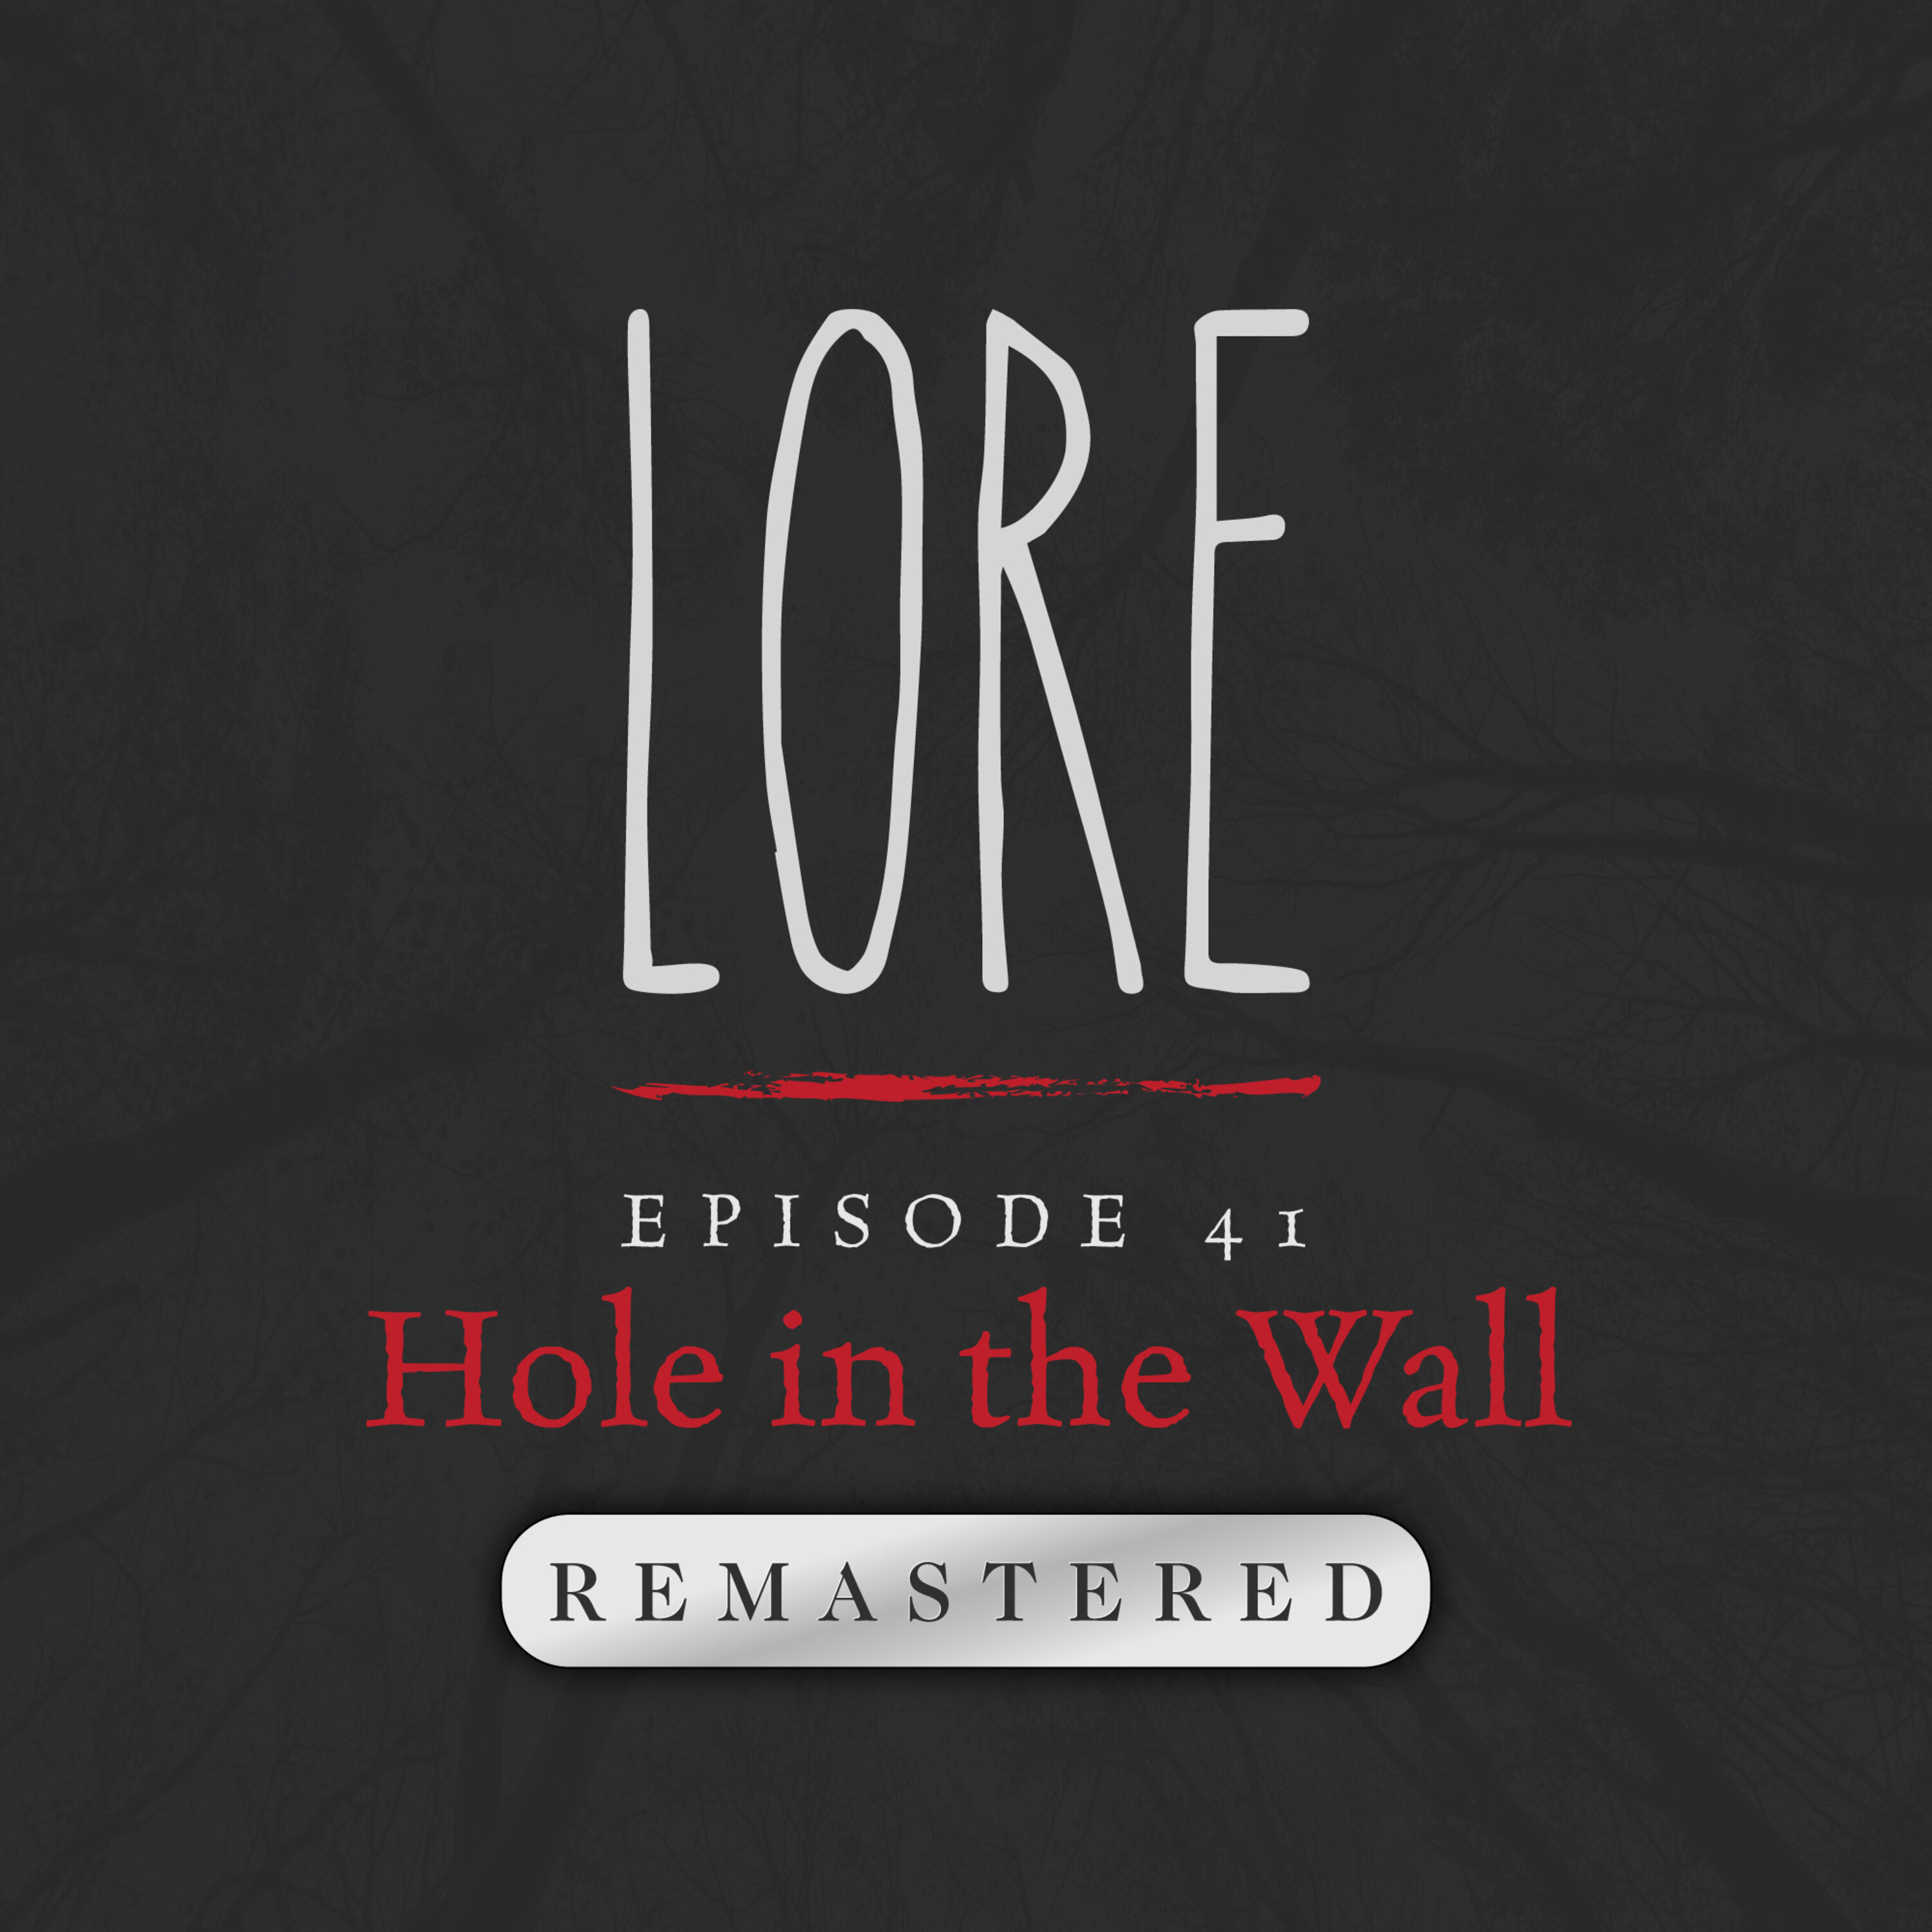 REMASTERED – Episode 41: Hole in the Wall